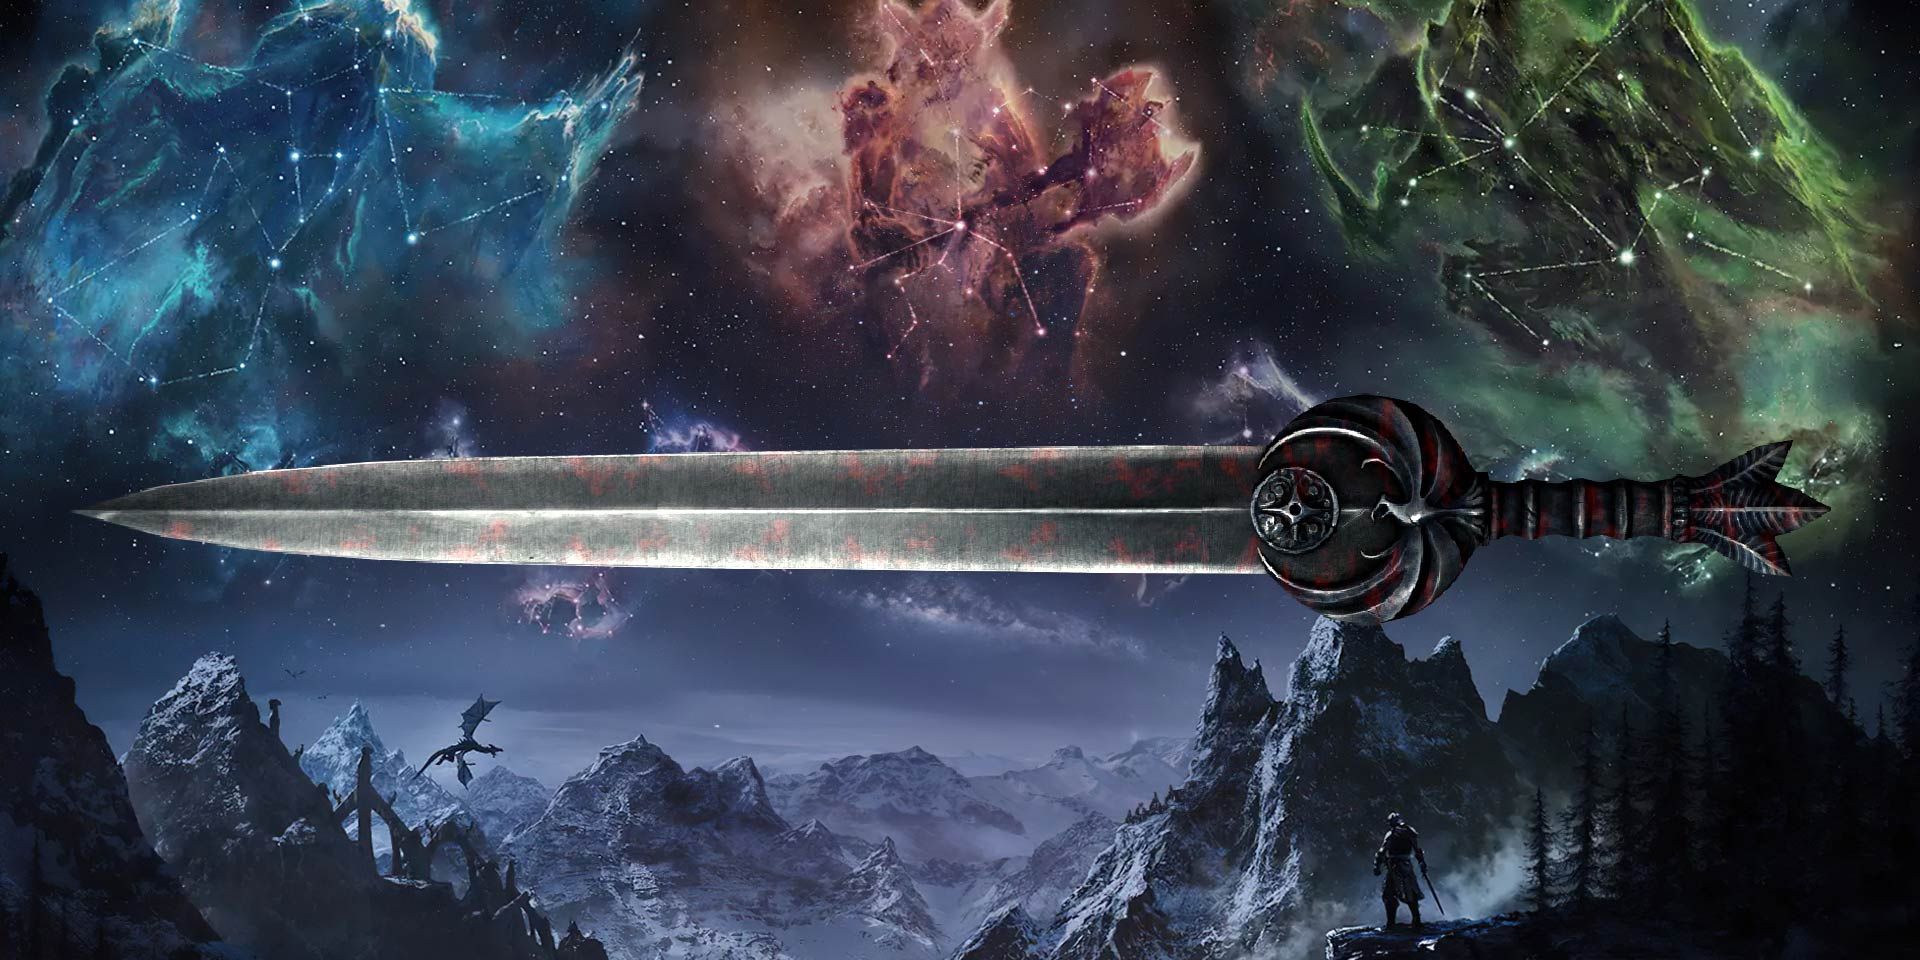 The Nightingale Blade among mountains and Elder Scrolls star signs.